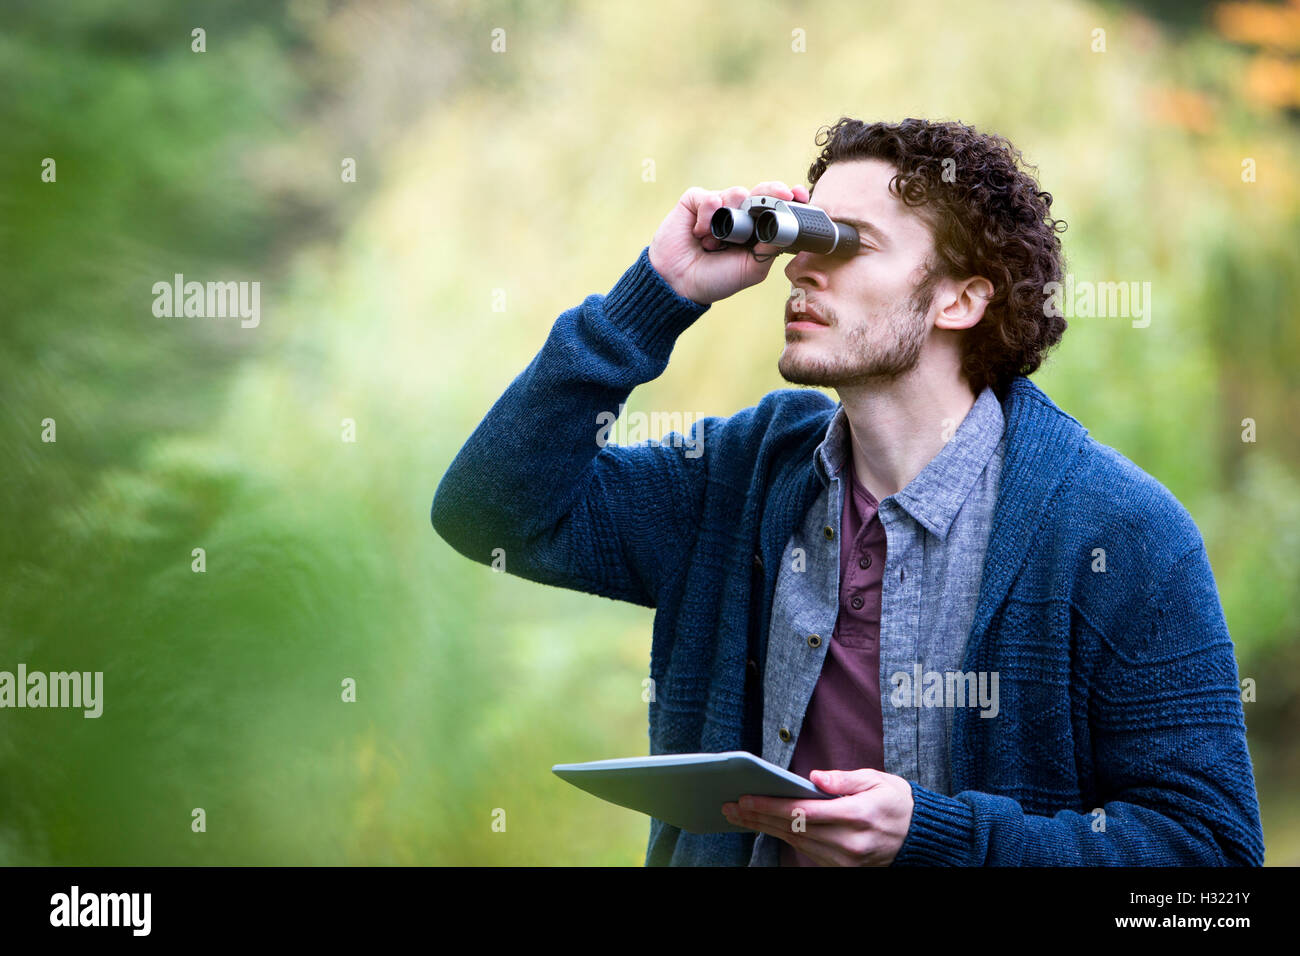 Young man analysing nature with binoculars. He is using a digital tablet to research. Stock Photo